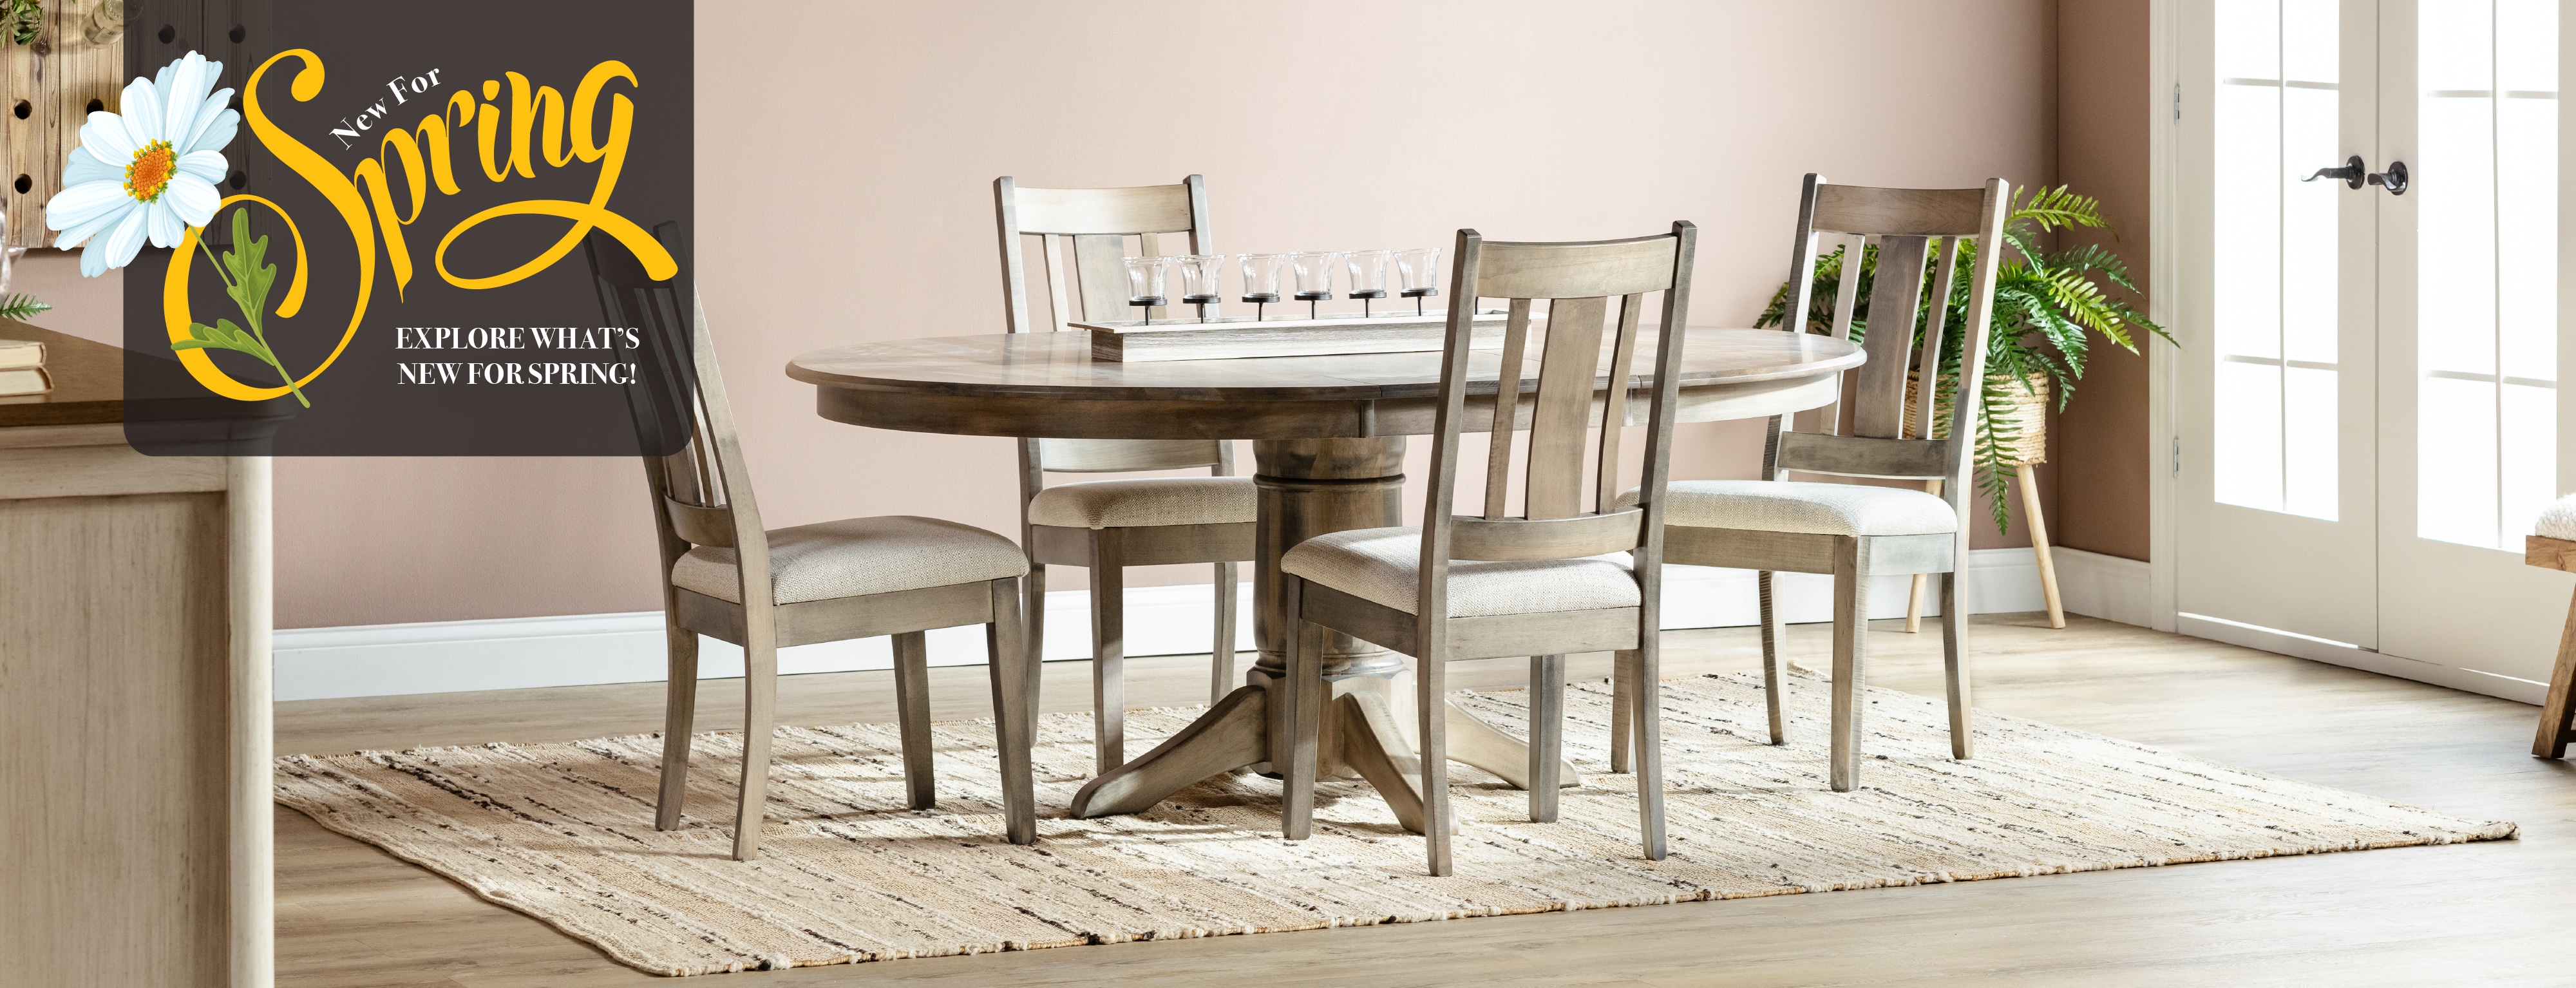 New For Spring Sale Dining